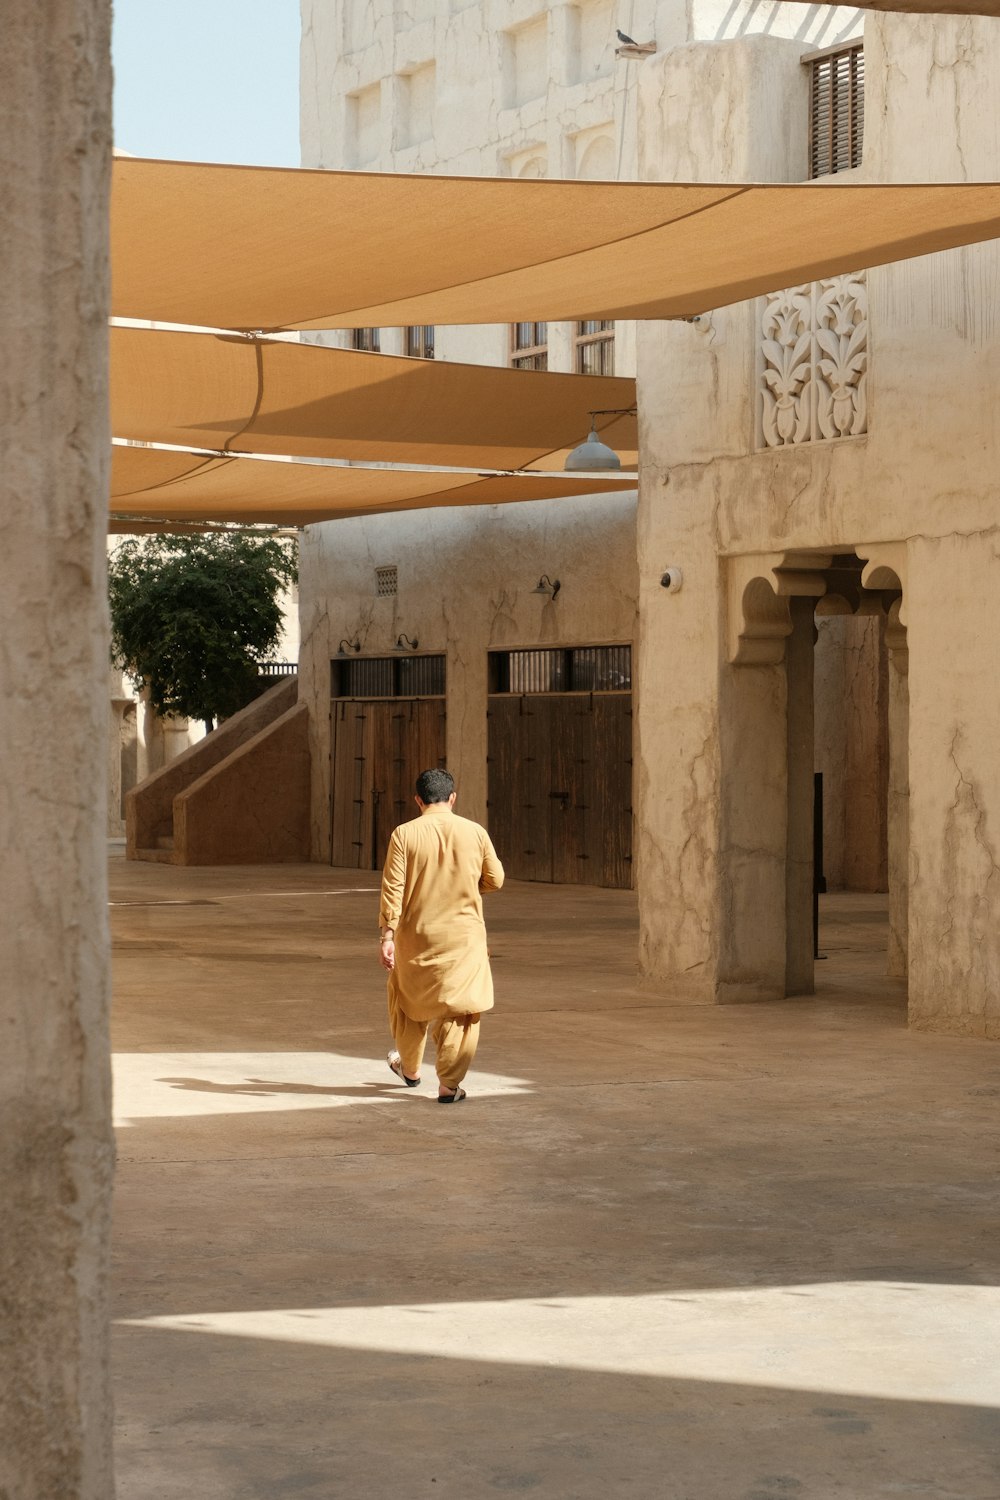 a man in a yellow outfit walking in a courtyard